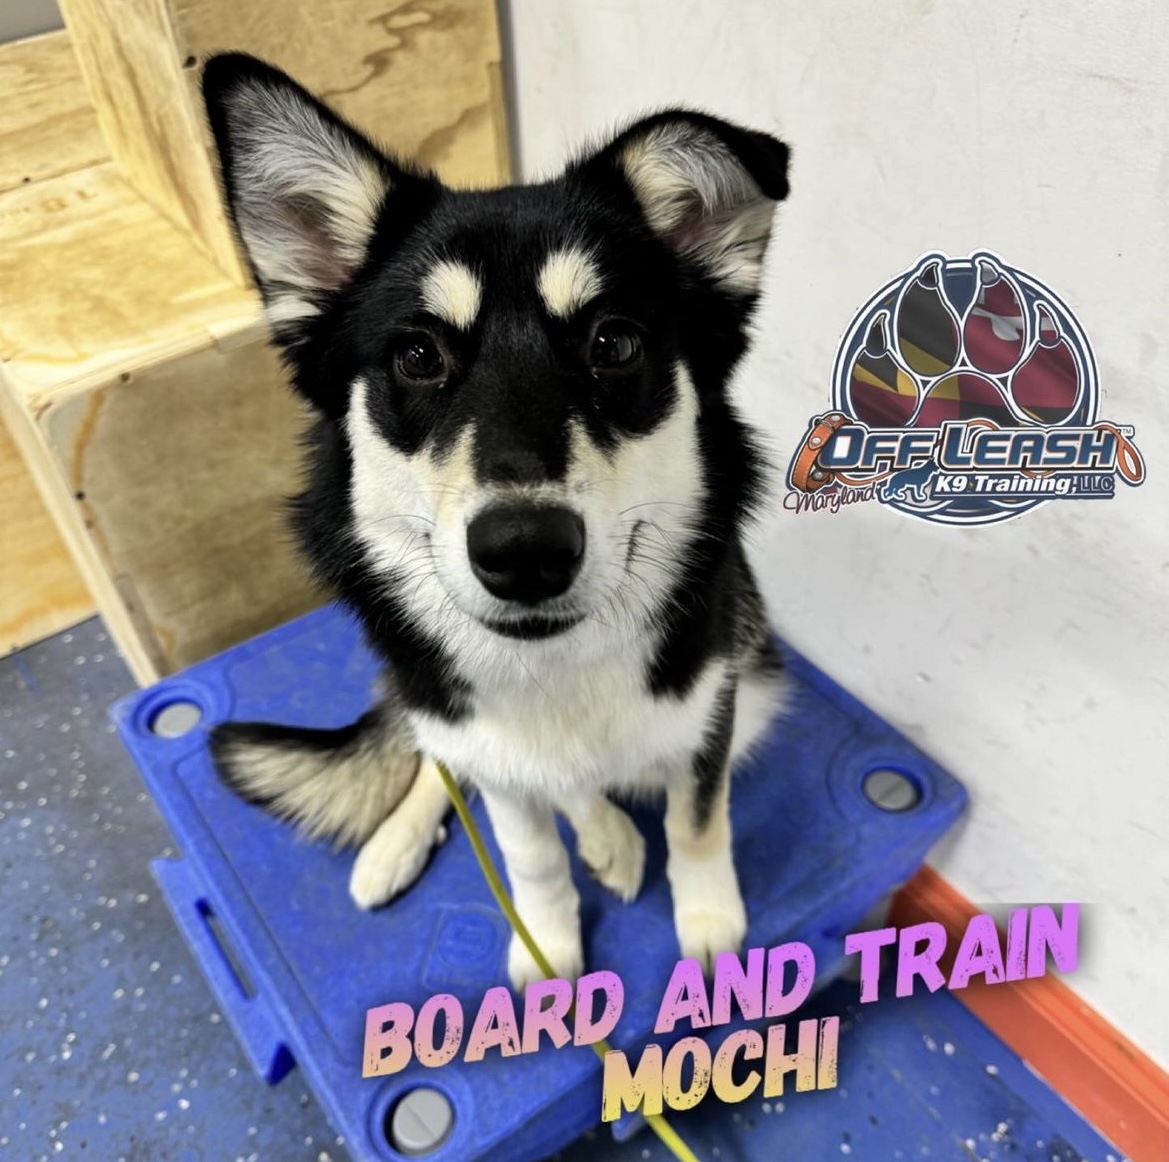 Dog named Mochi who completed our 2 week board and train dog training